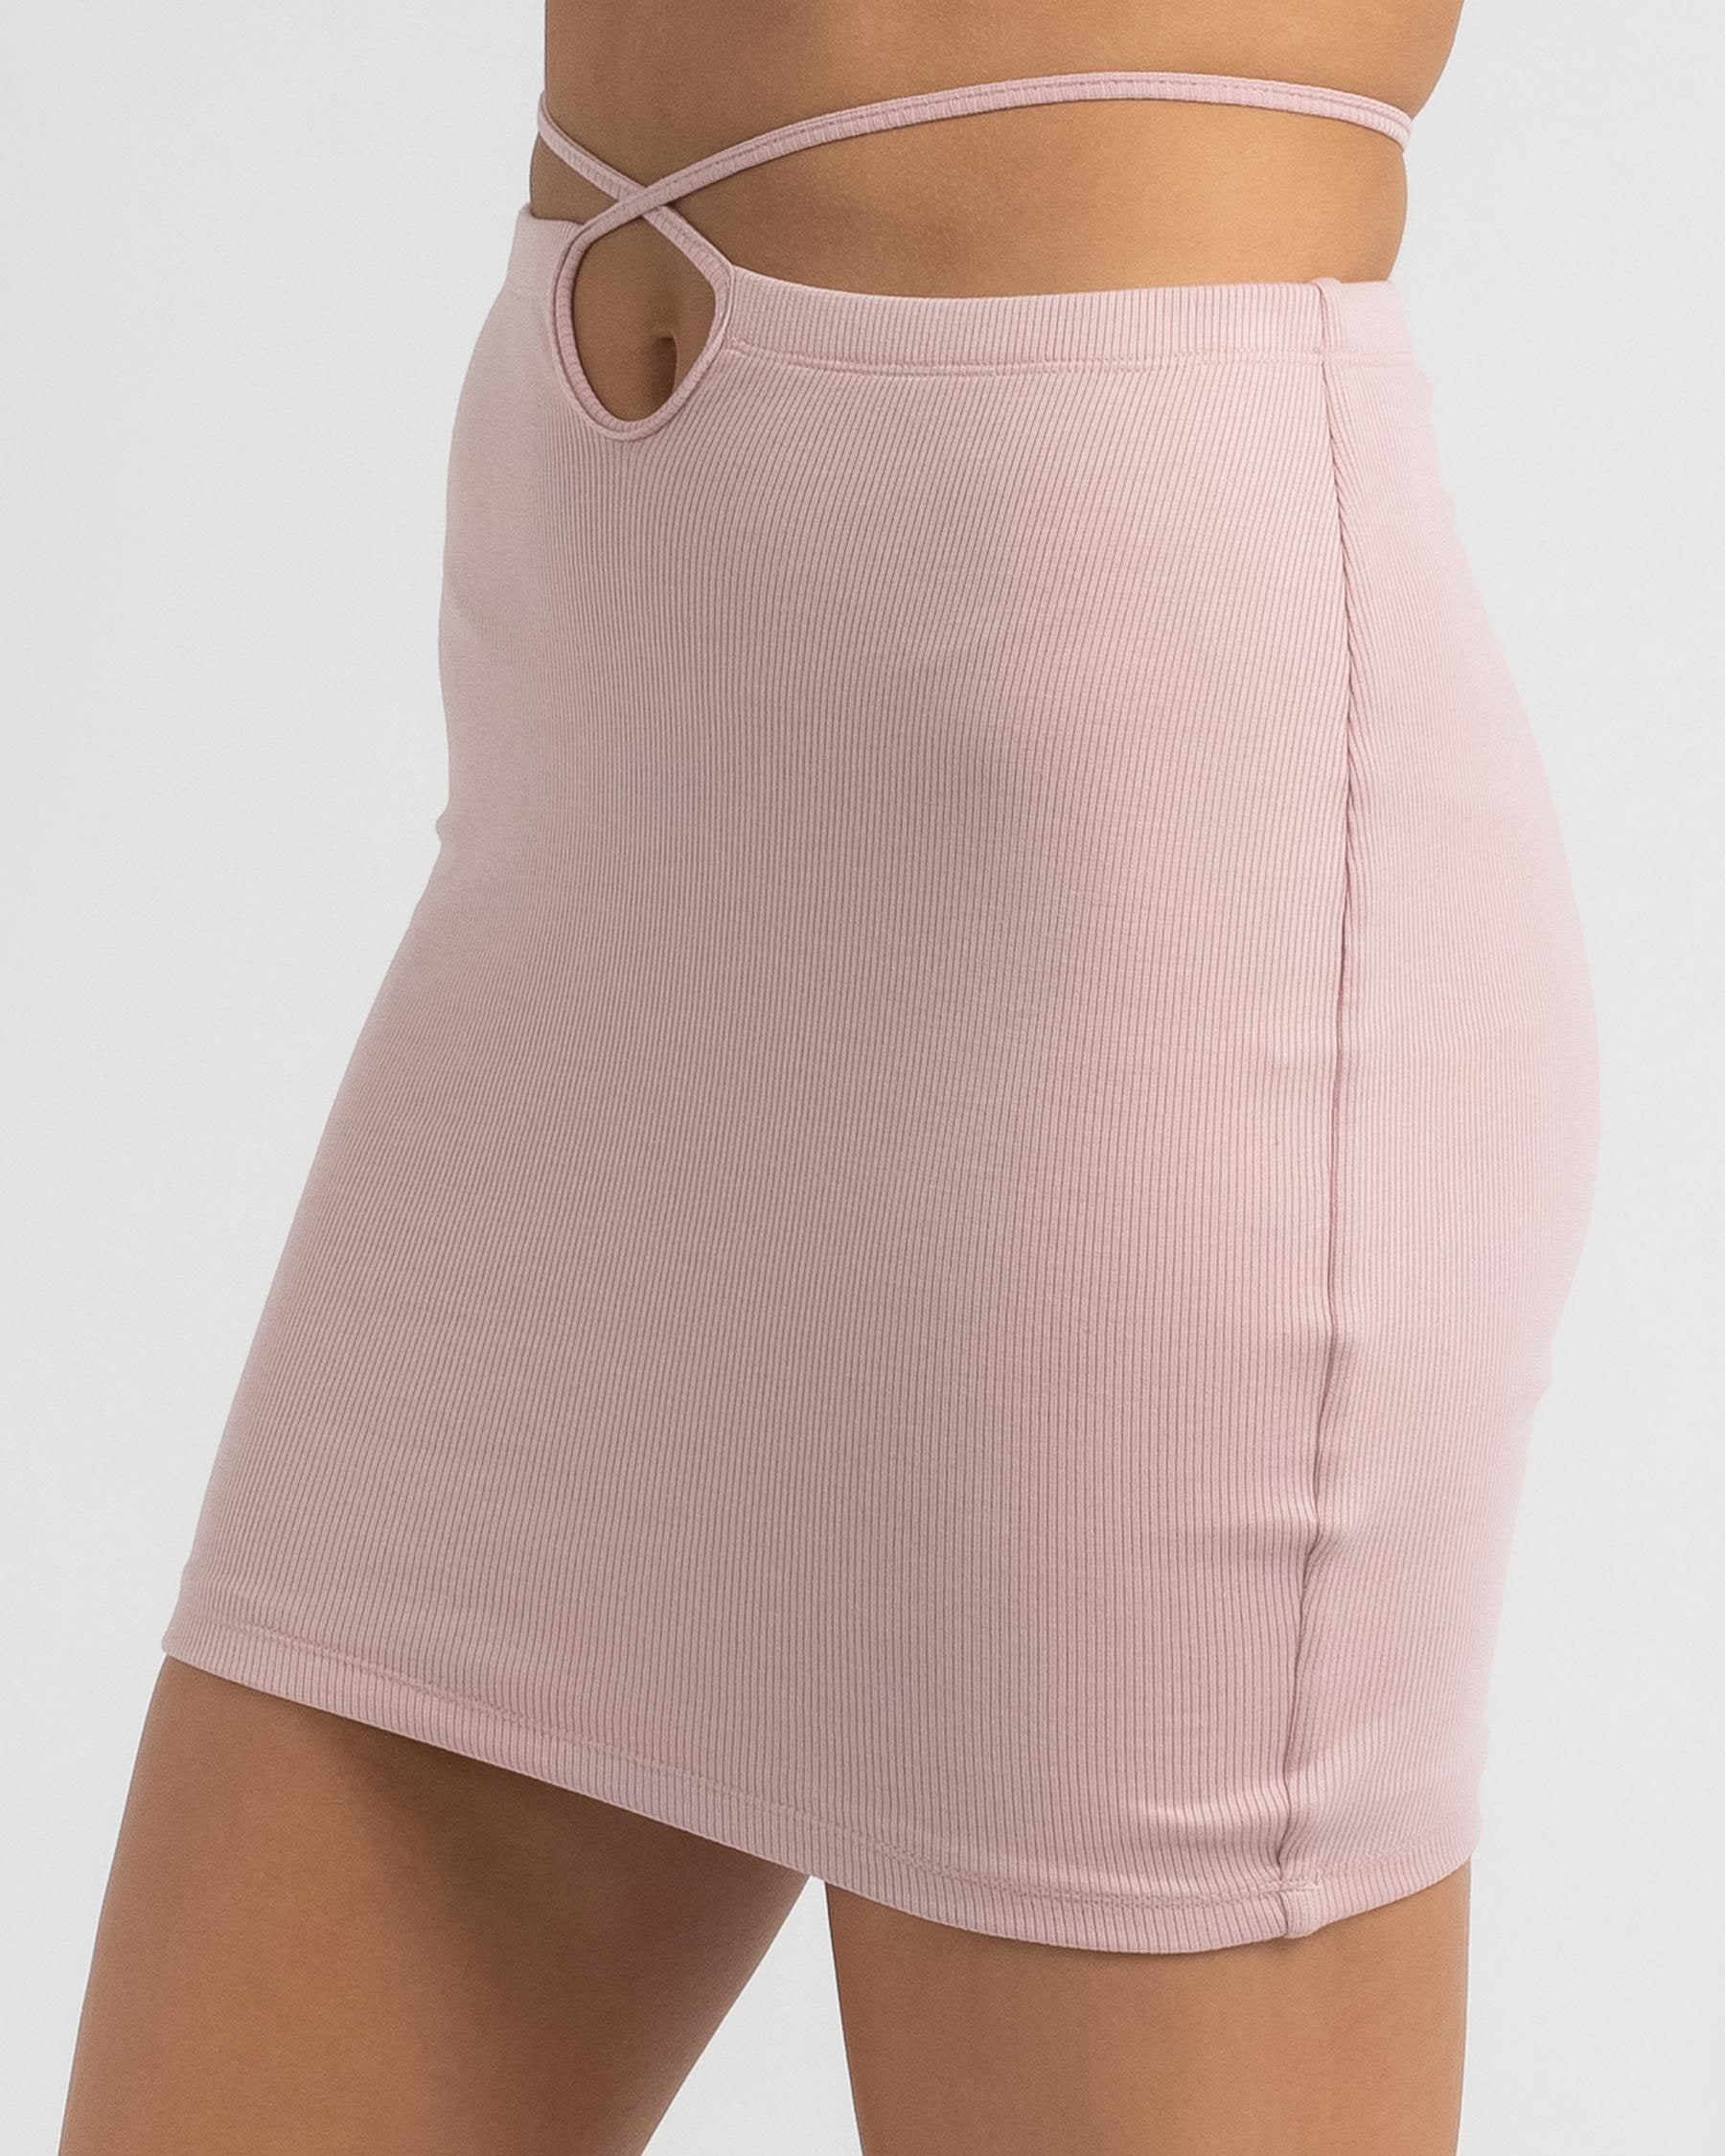 Ava And Ever Harper Skirt In Dusty Pink - Fast Shipping & Easy Returns ...